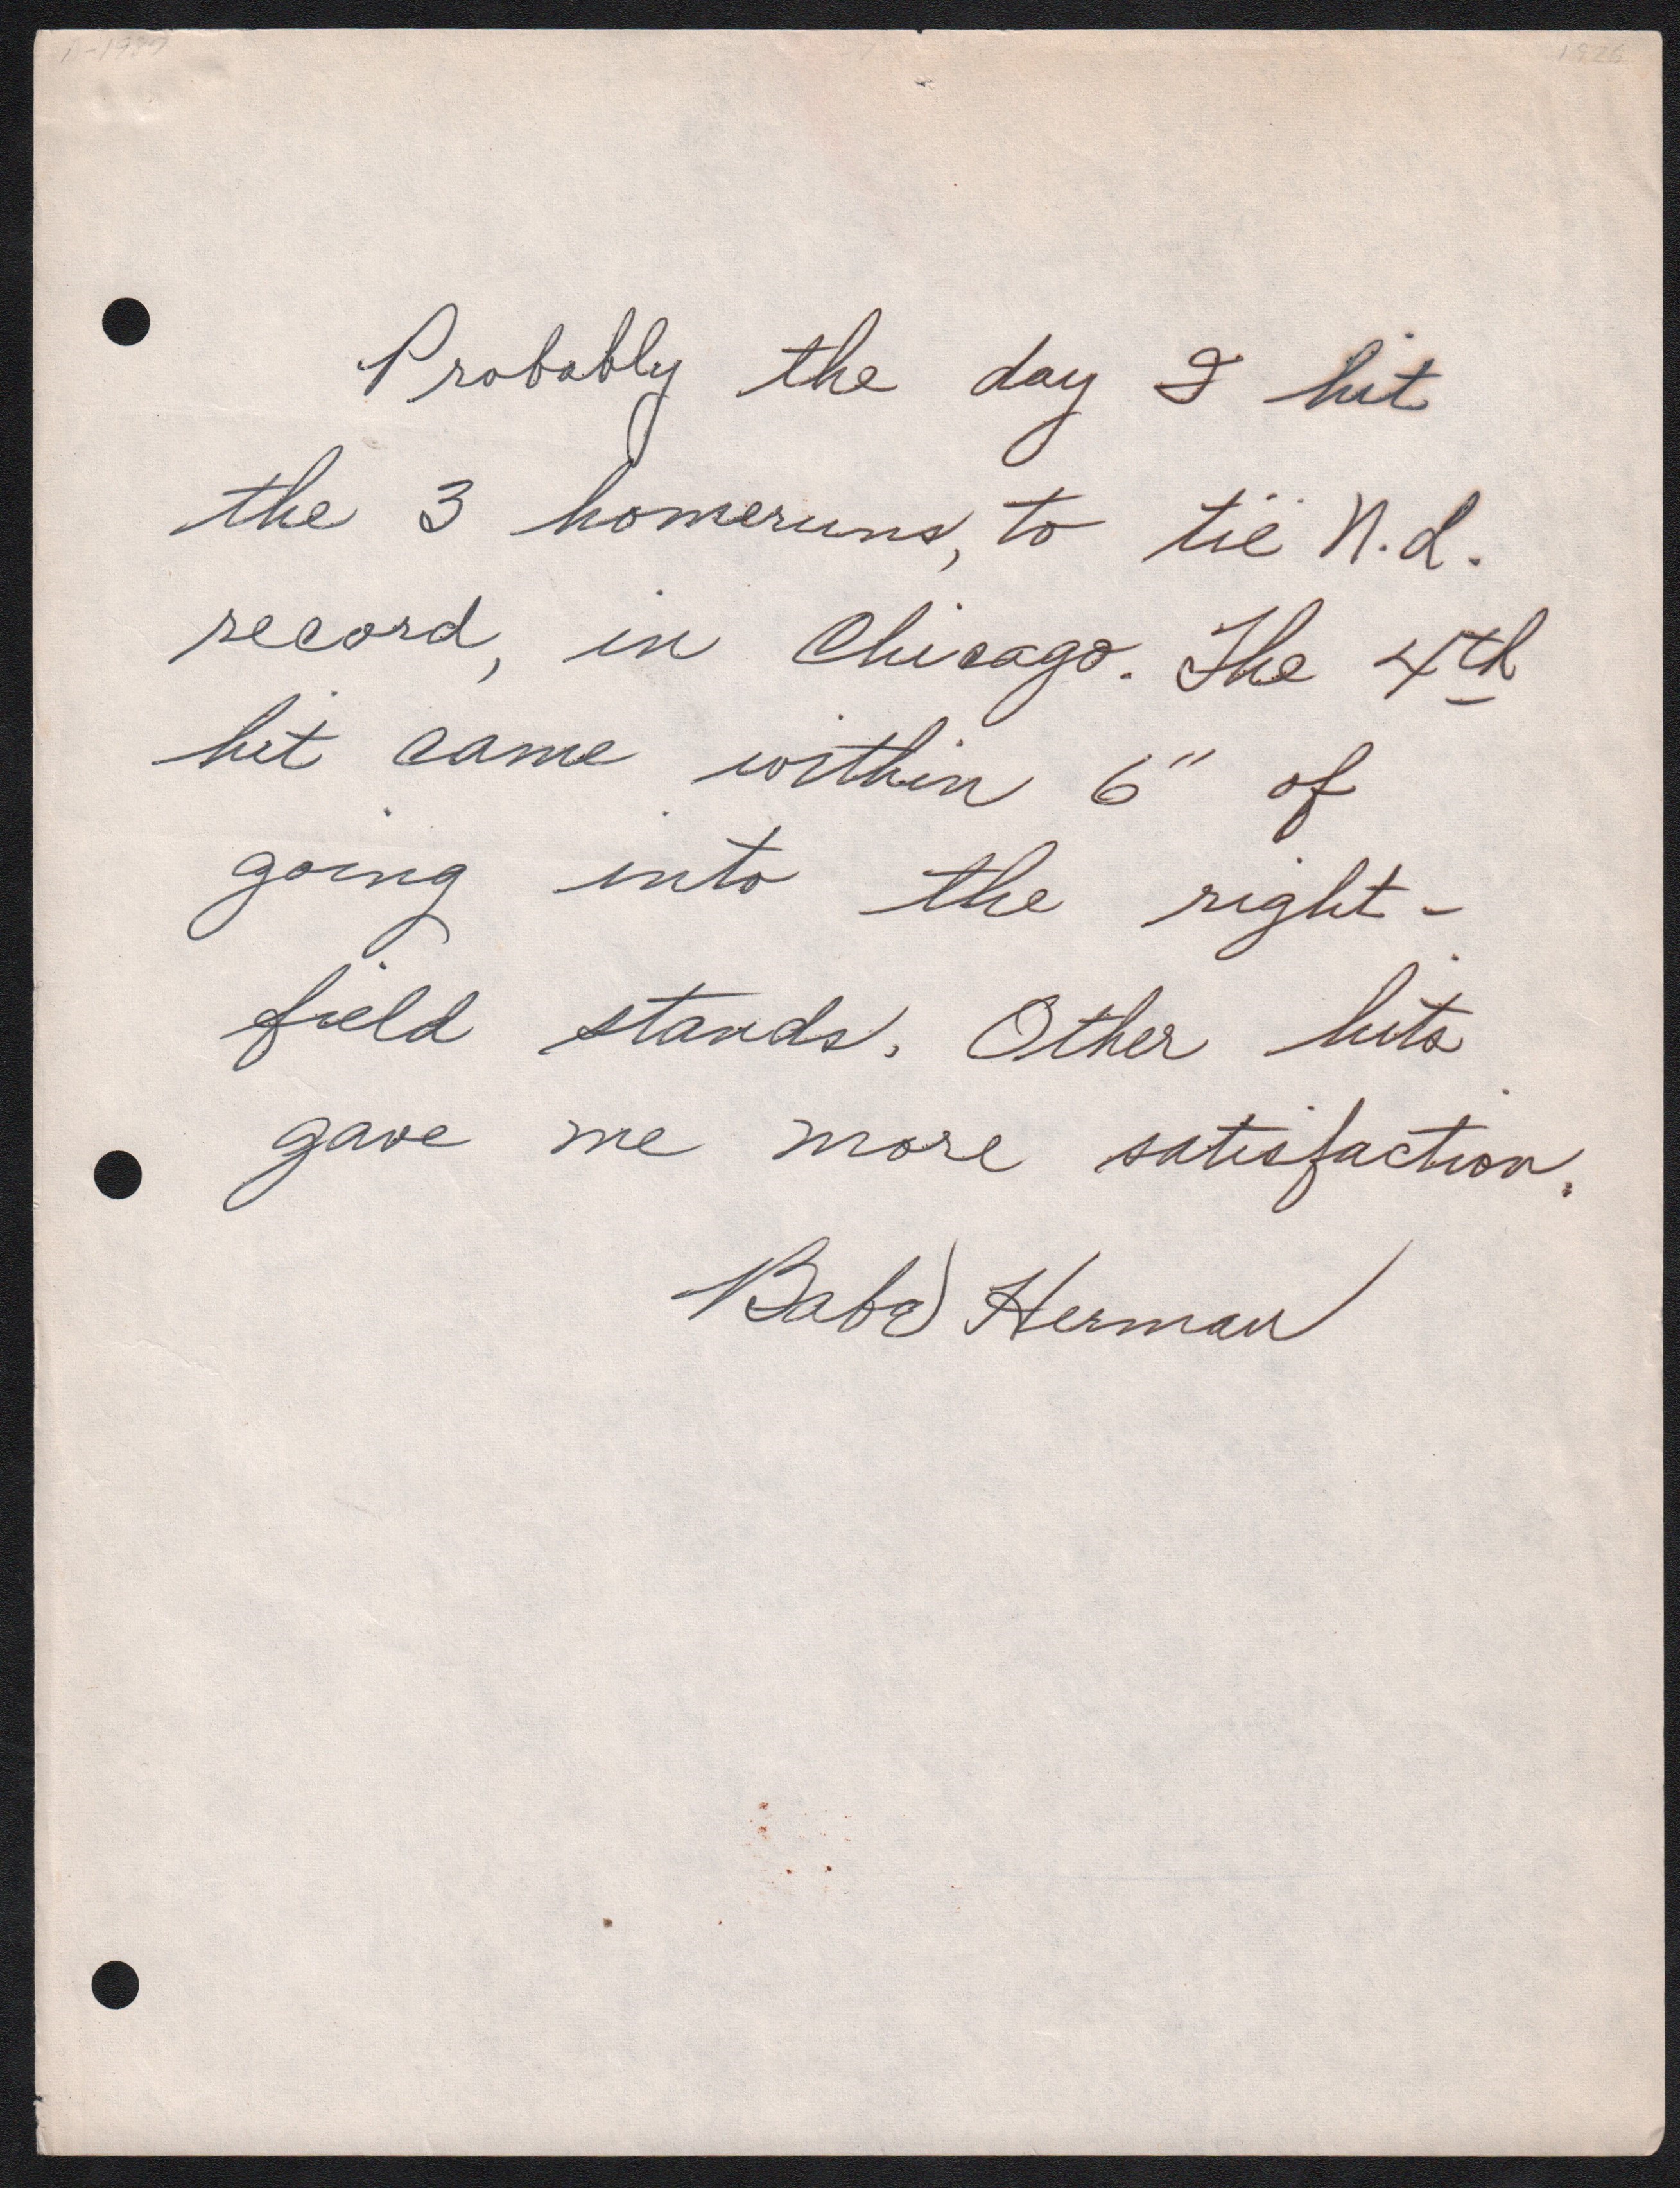 - Babe Herman Signed Greatest Moment Letter 3-HRs to Tie N.L. Record